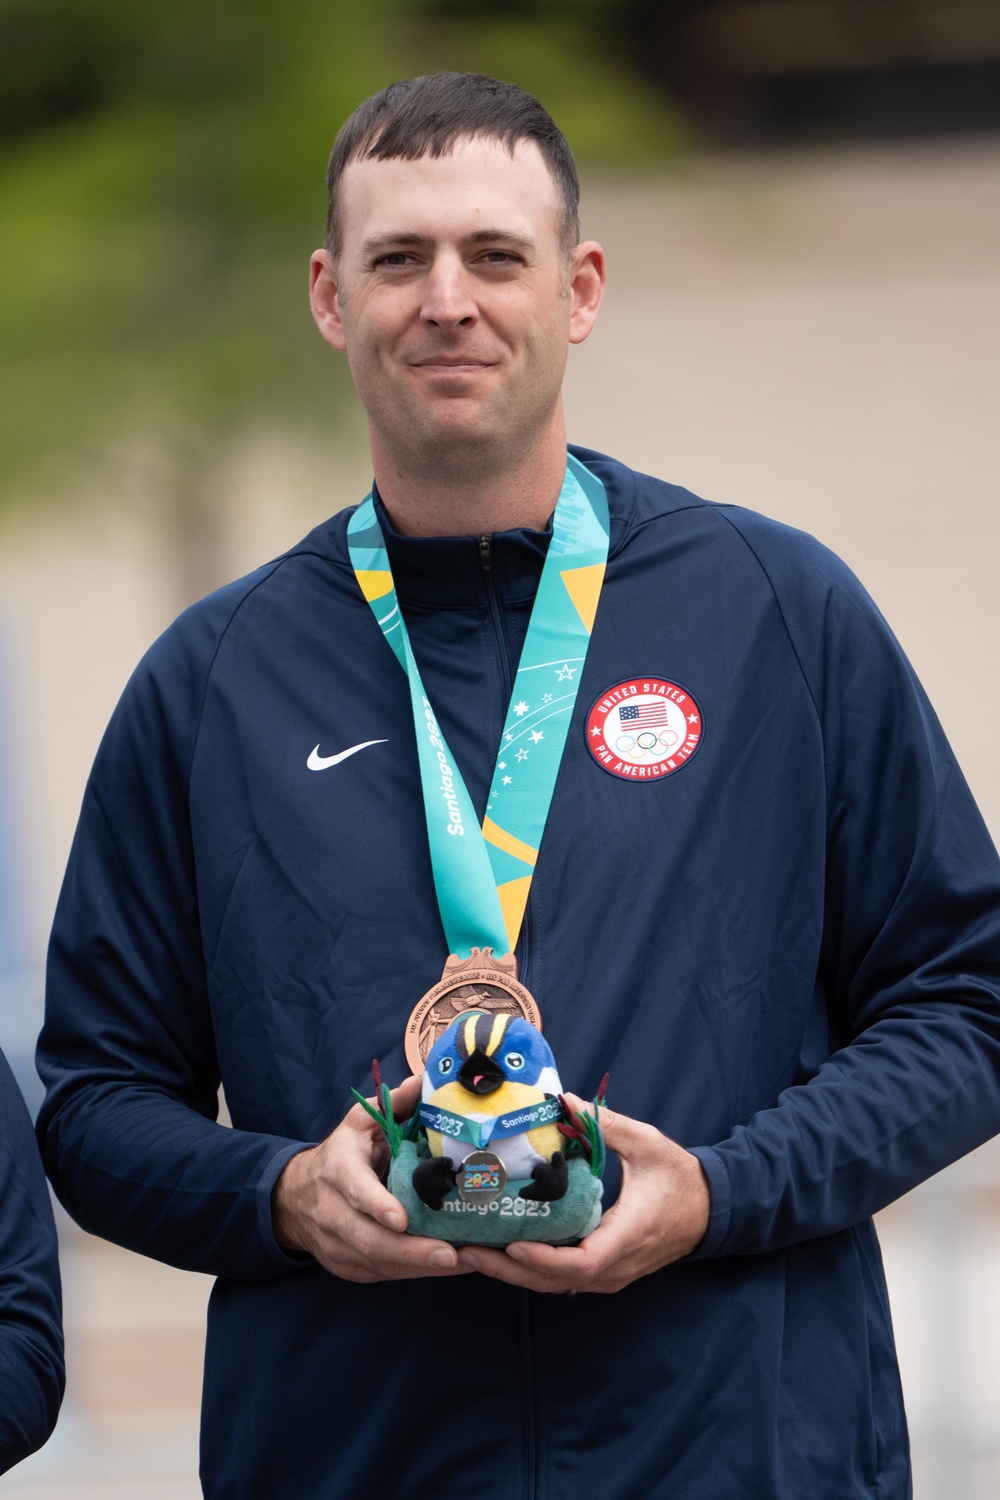 Staff Sgt. Nick Mowrer wins bronze in the Pan American Games